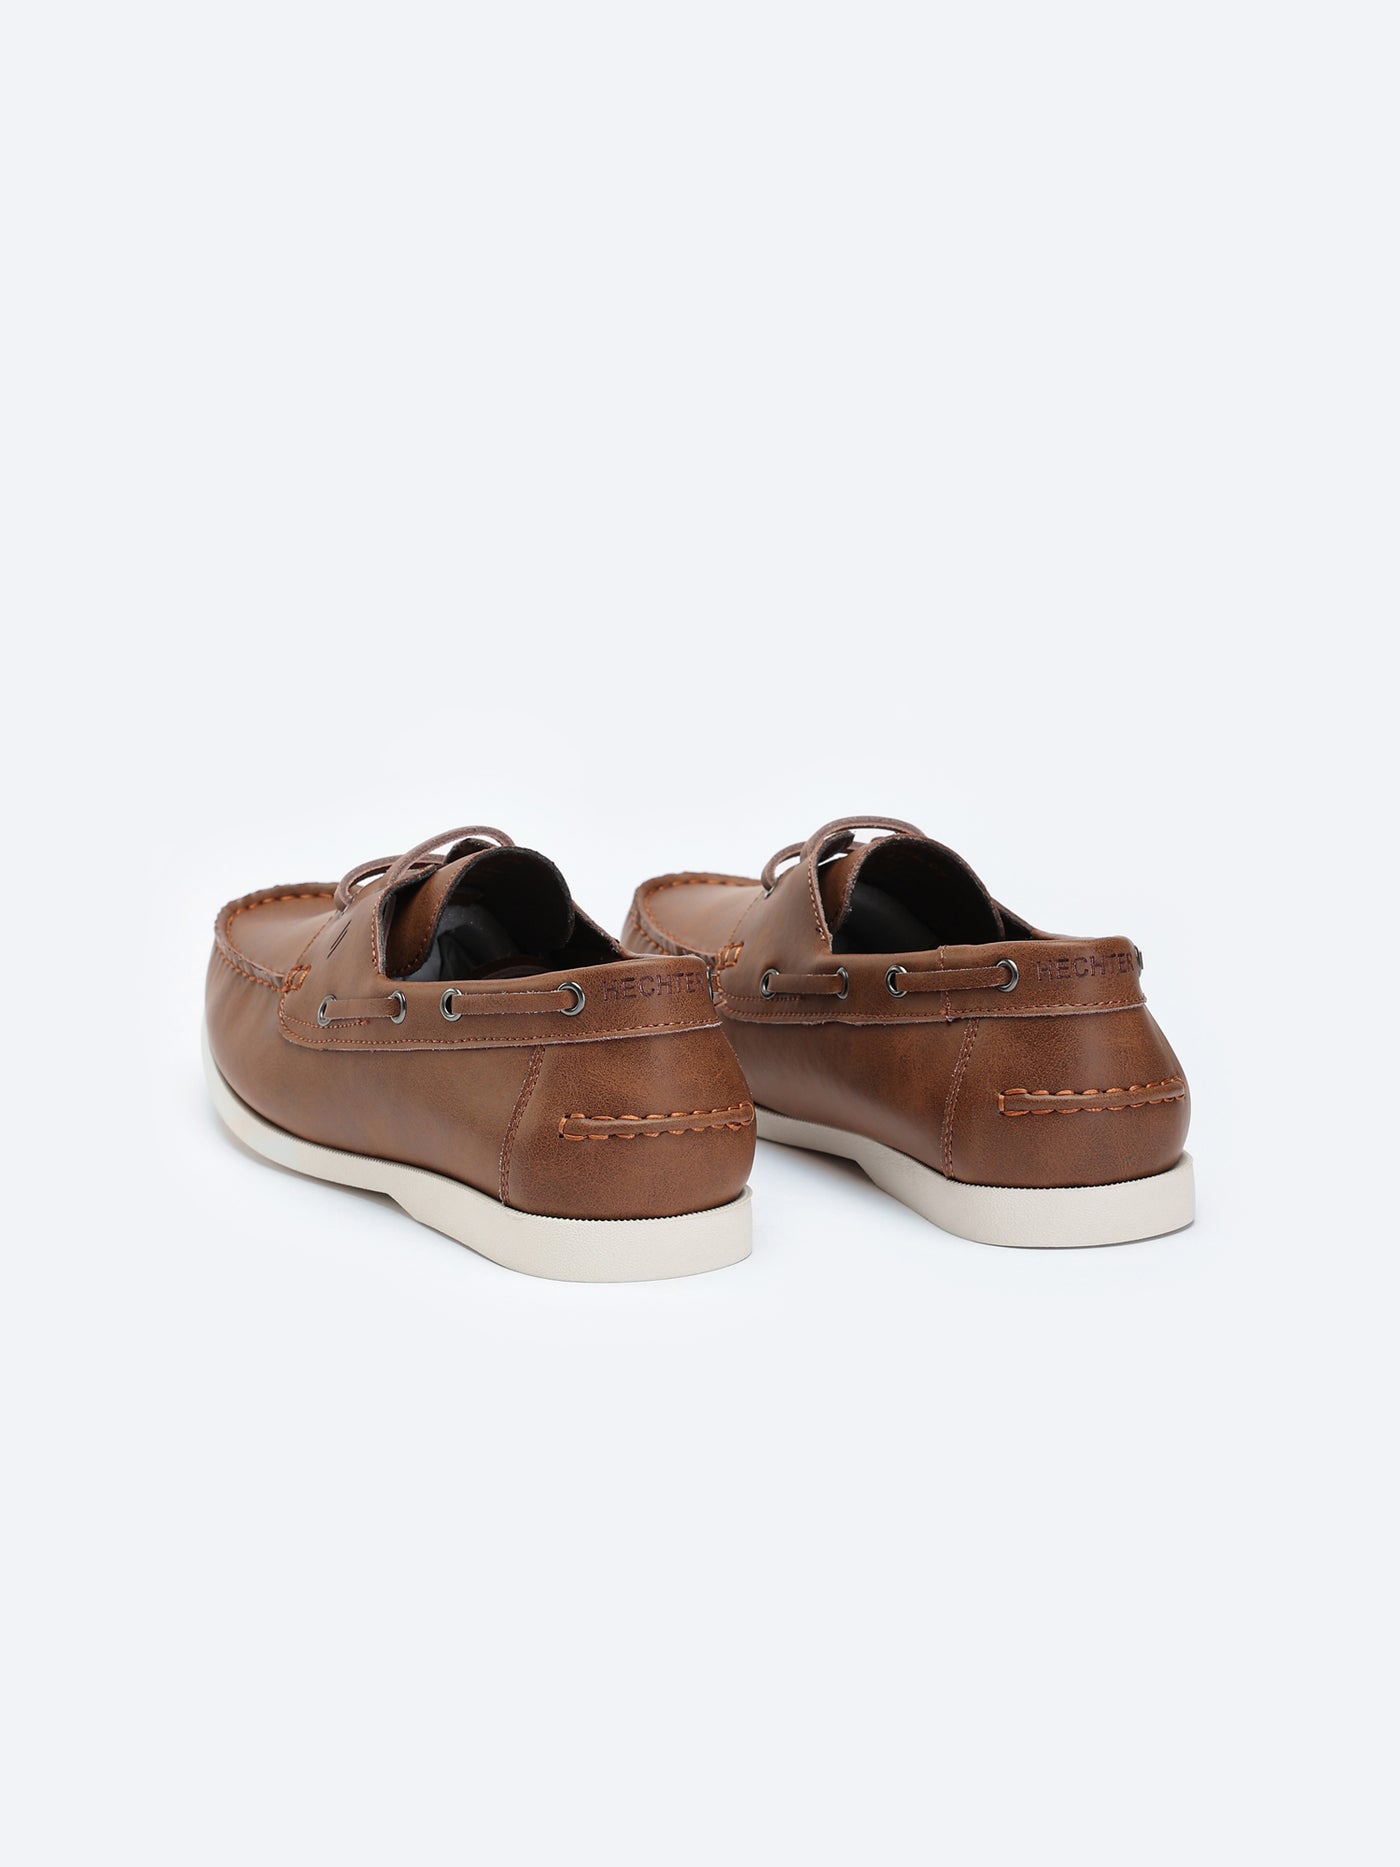 Loafers - Slip-on - Stitched